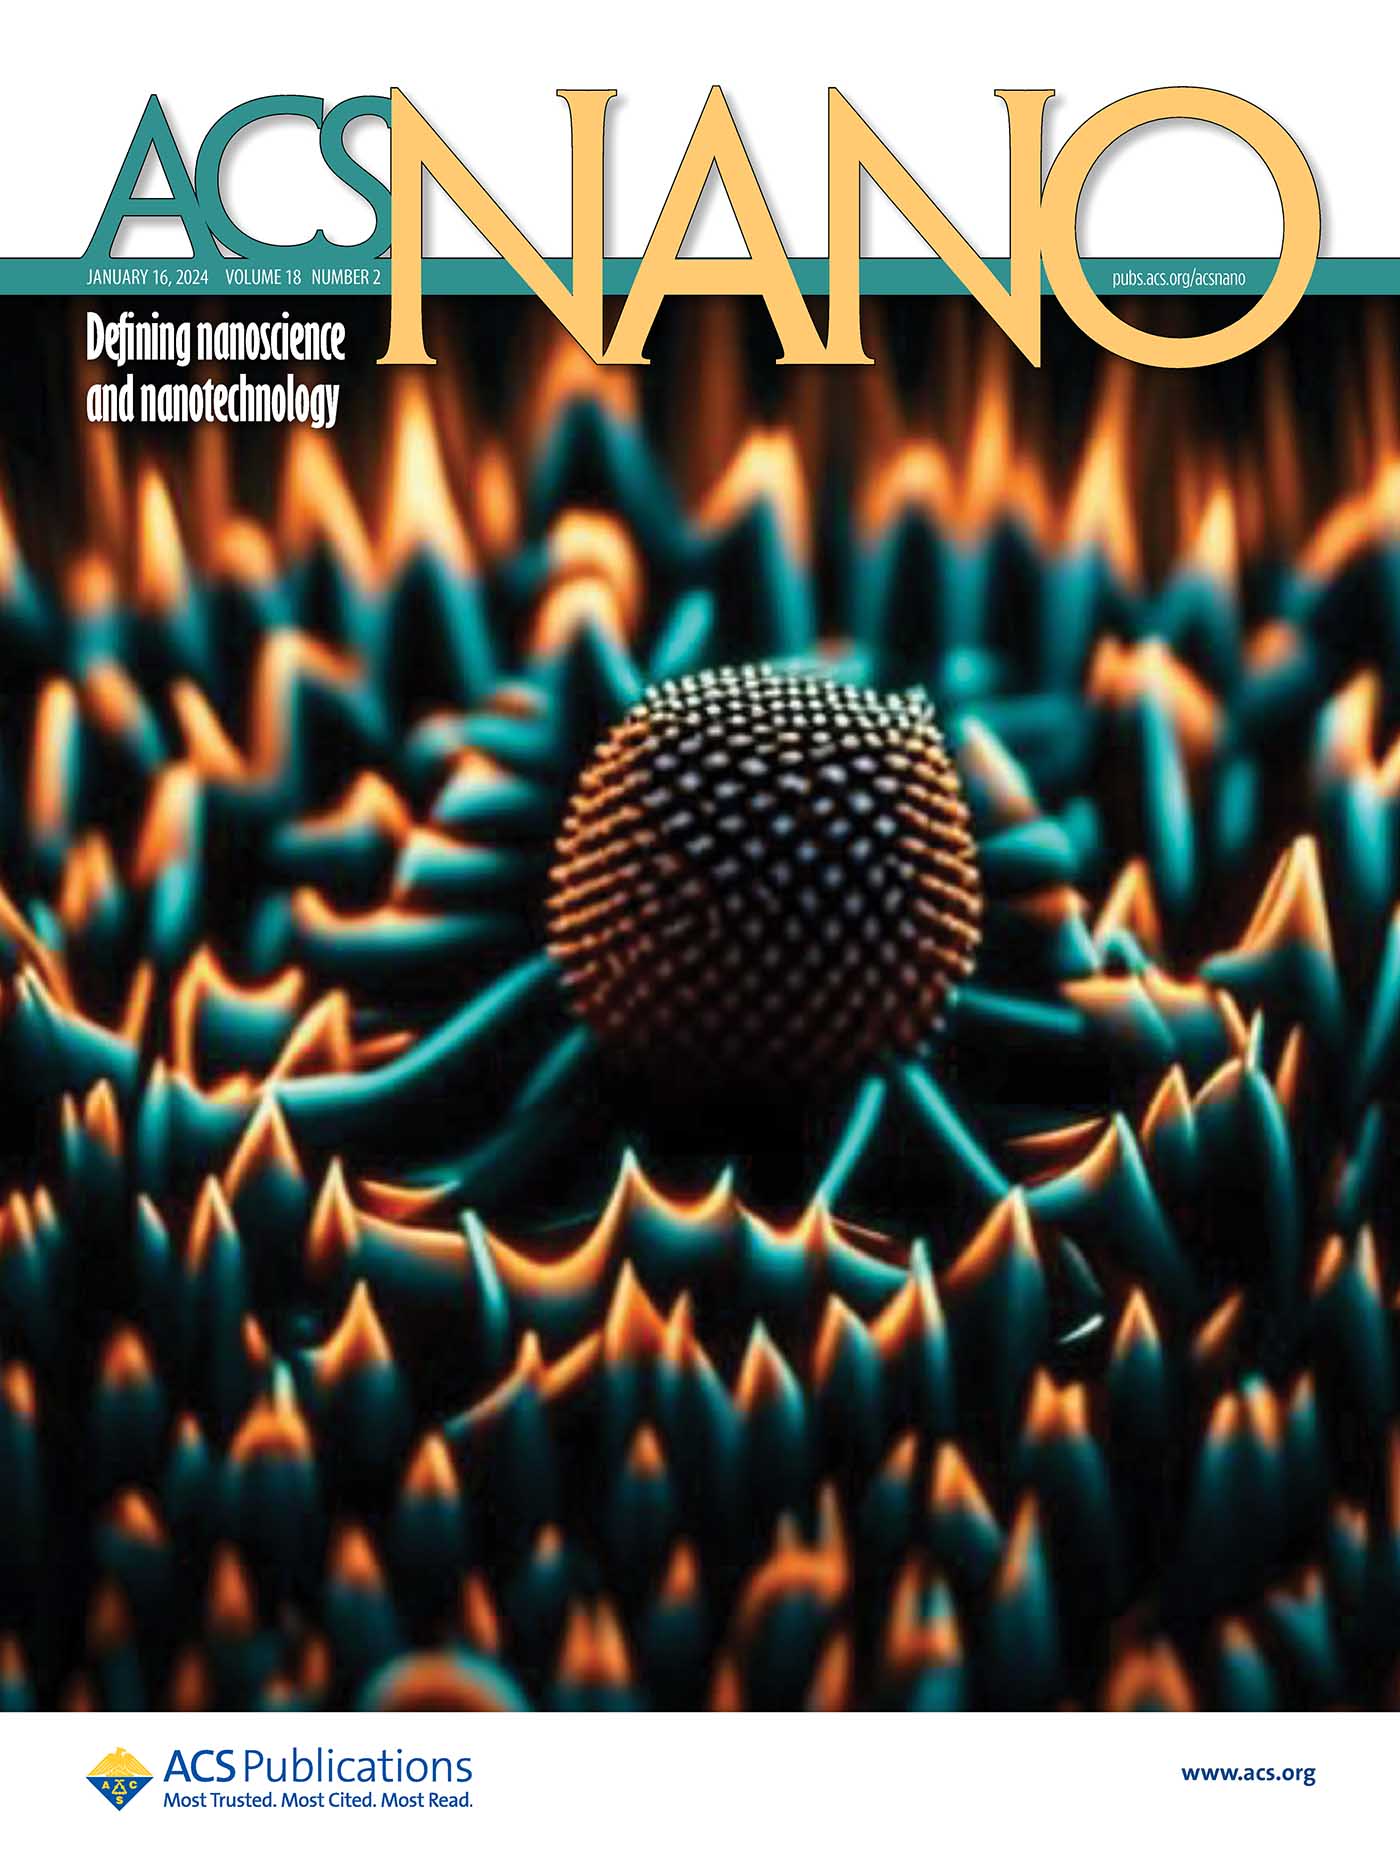 The team's AI generated image on the cover of the American Chemical Society's renowned nanotechnology journal ACS Nano.